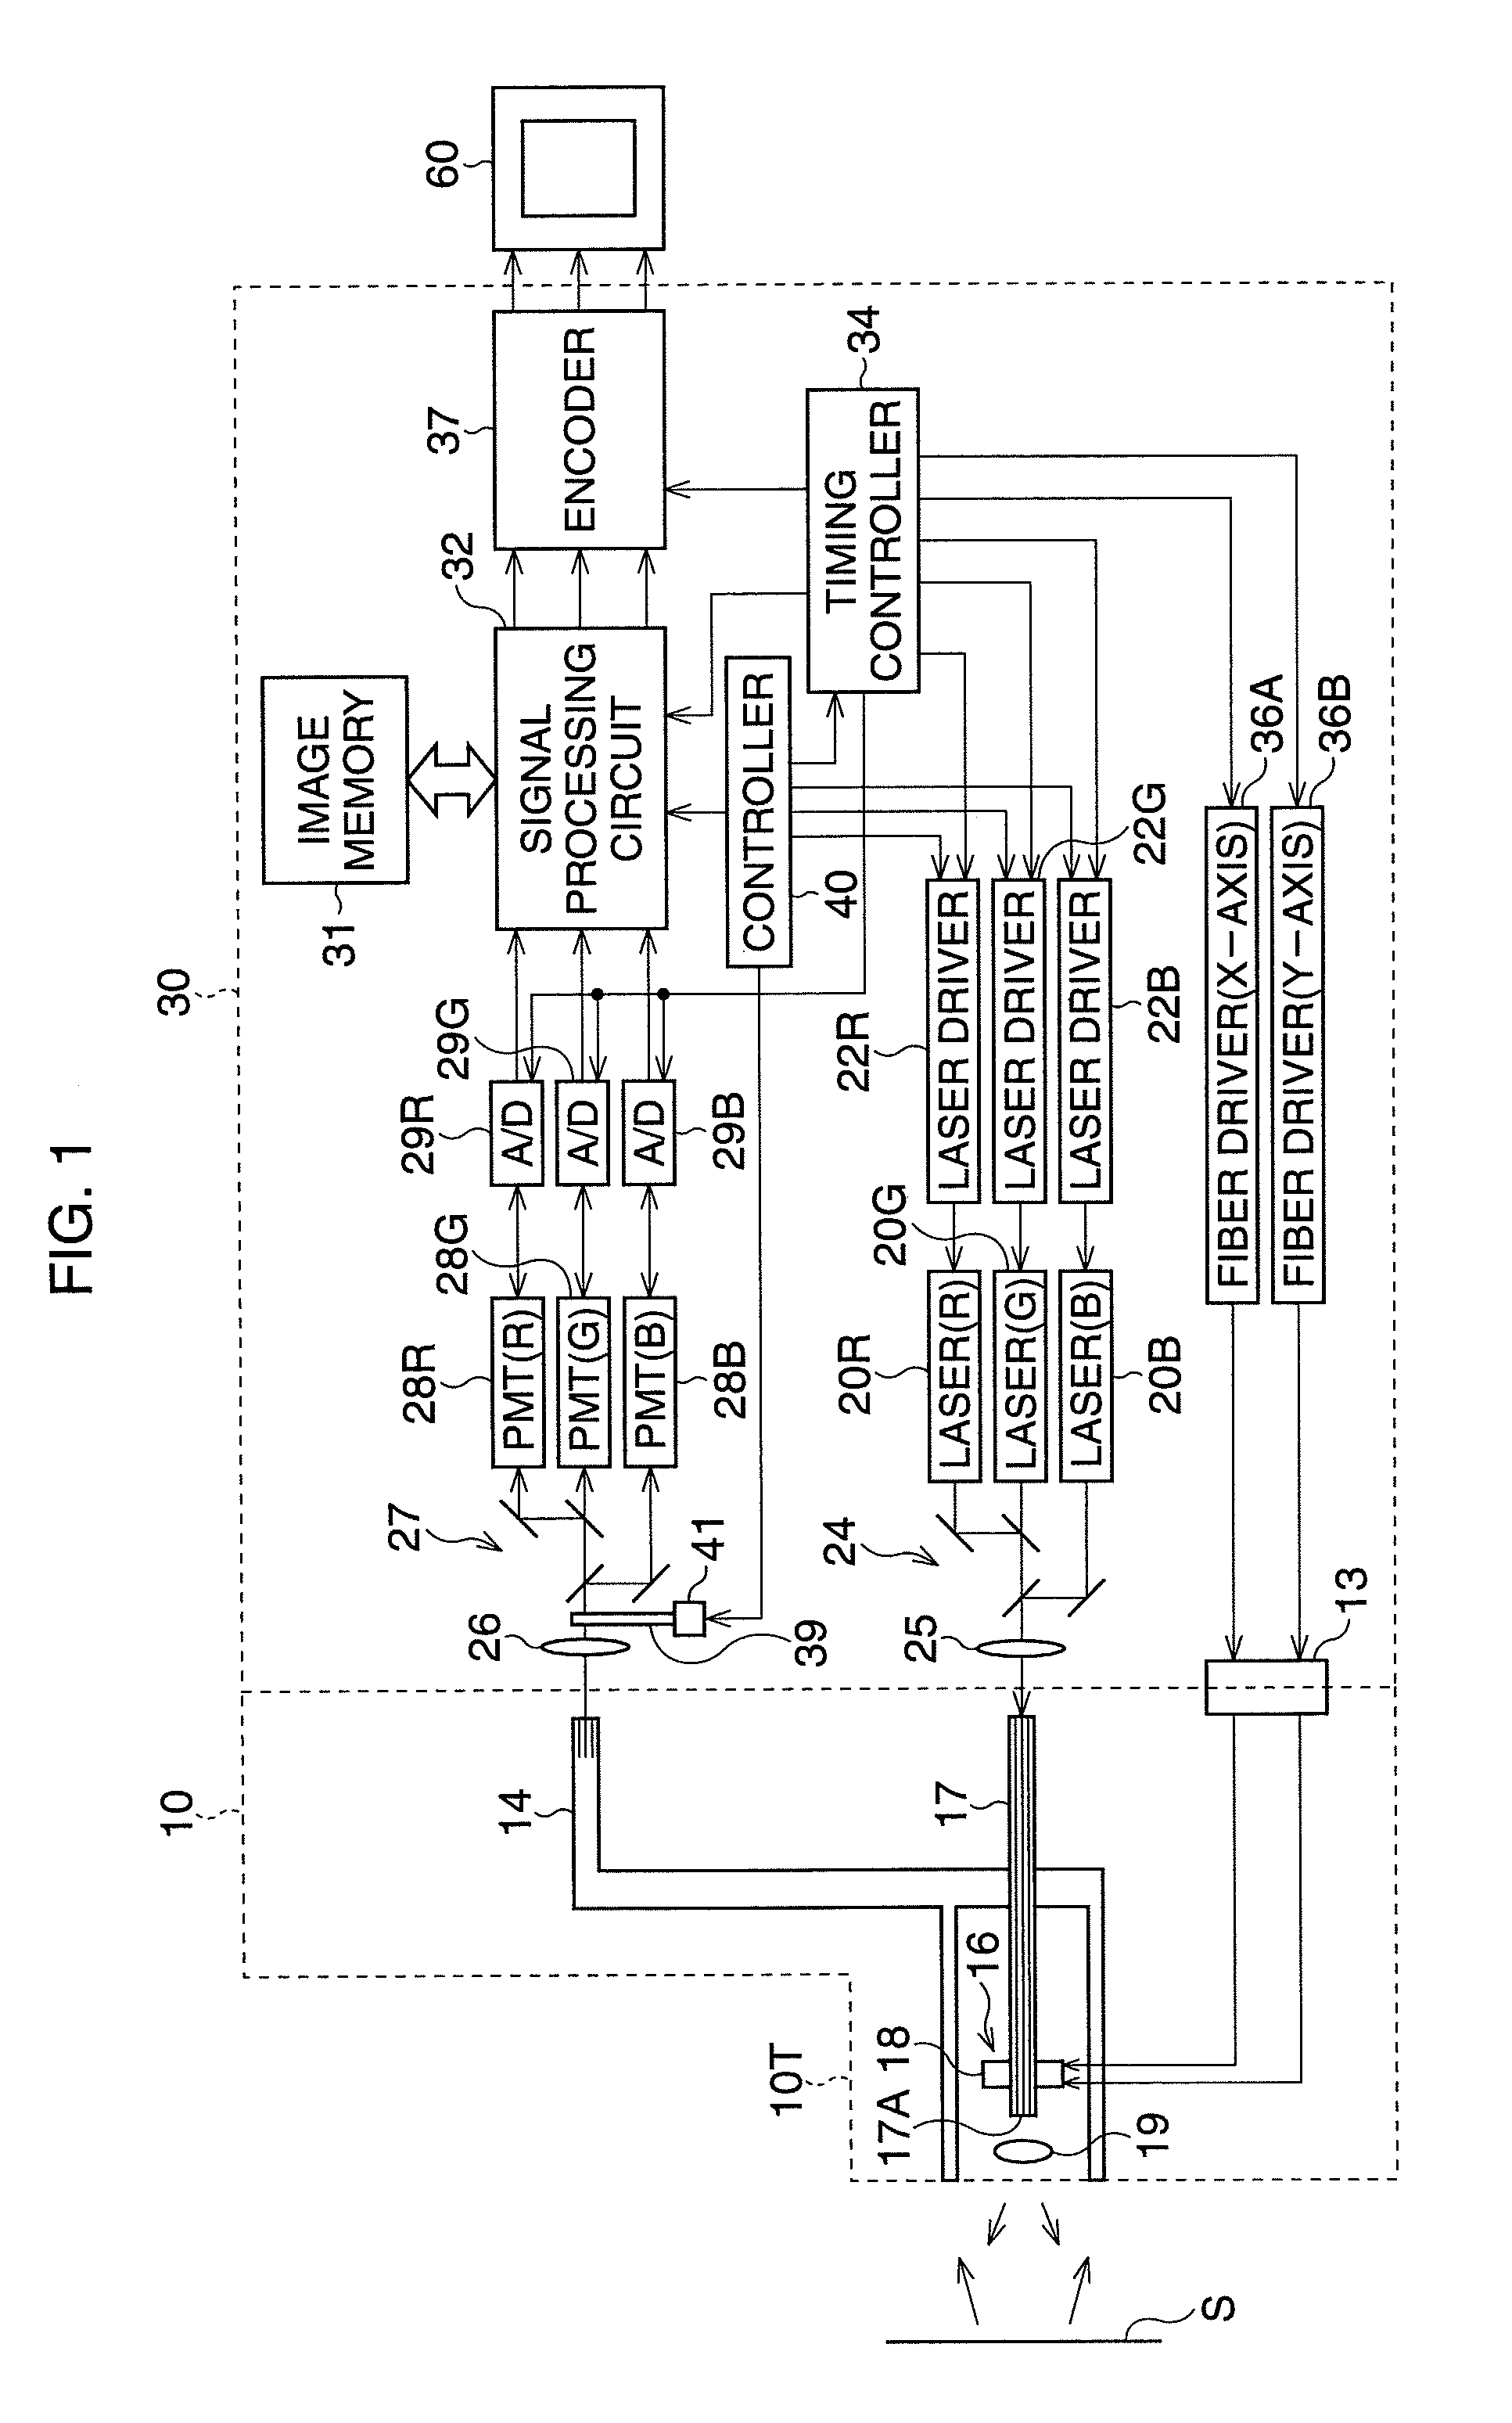 Endoscope system with scanning function